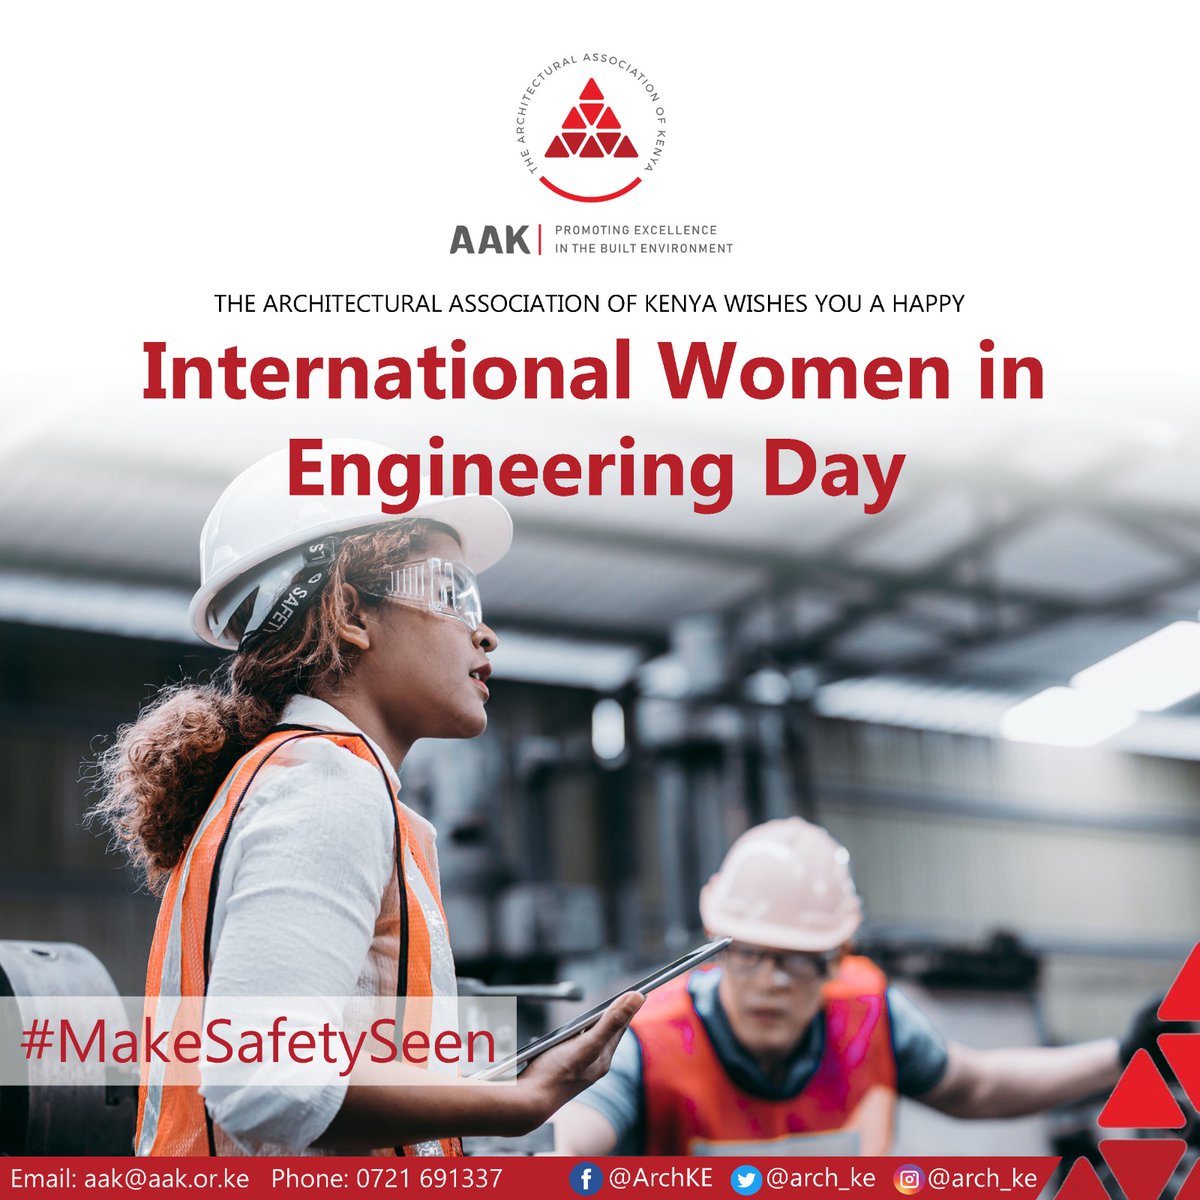 The Architectural Association of Kenya Wishes you a happy International Women in Engineering Day!

#MakeSafetySeen @Engineers_aak